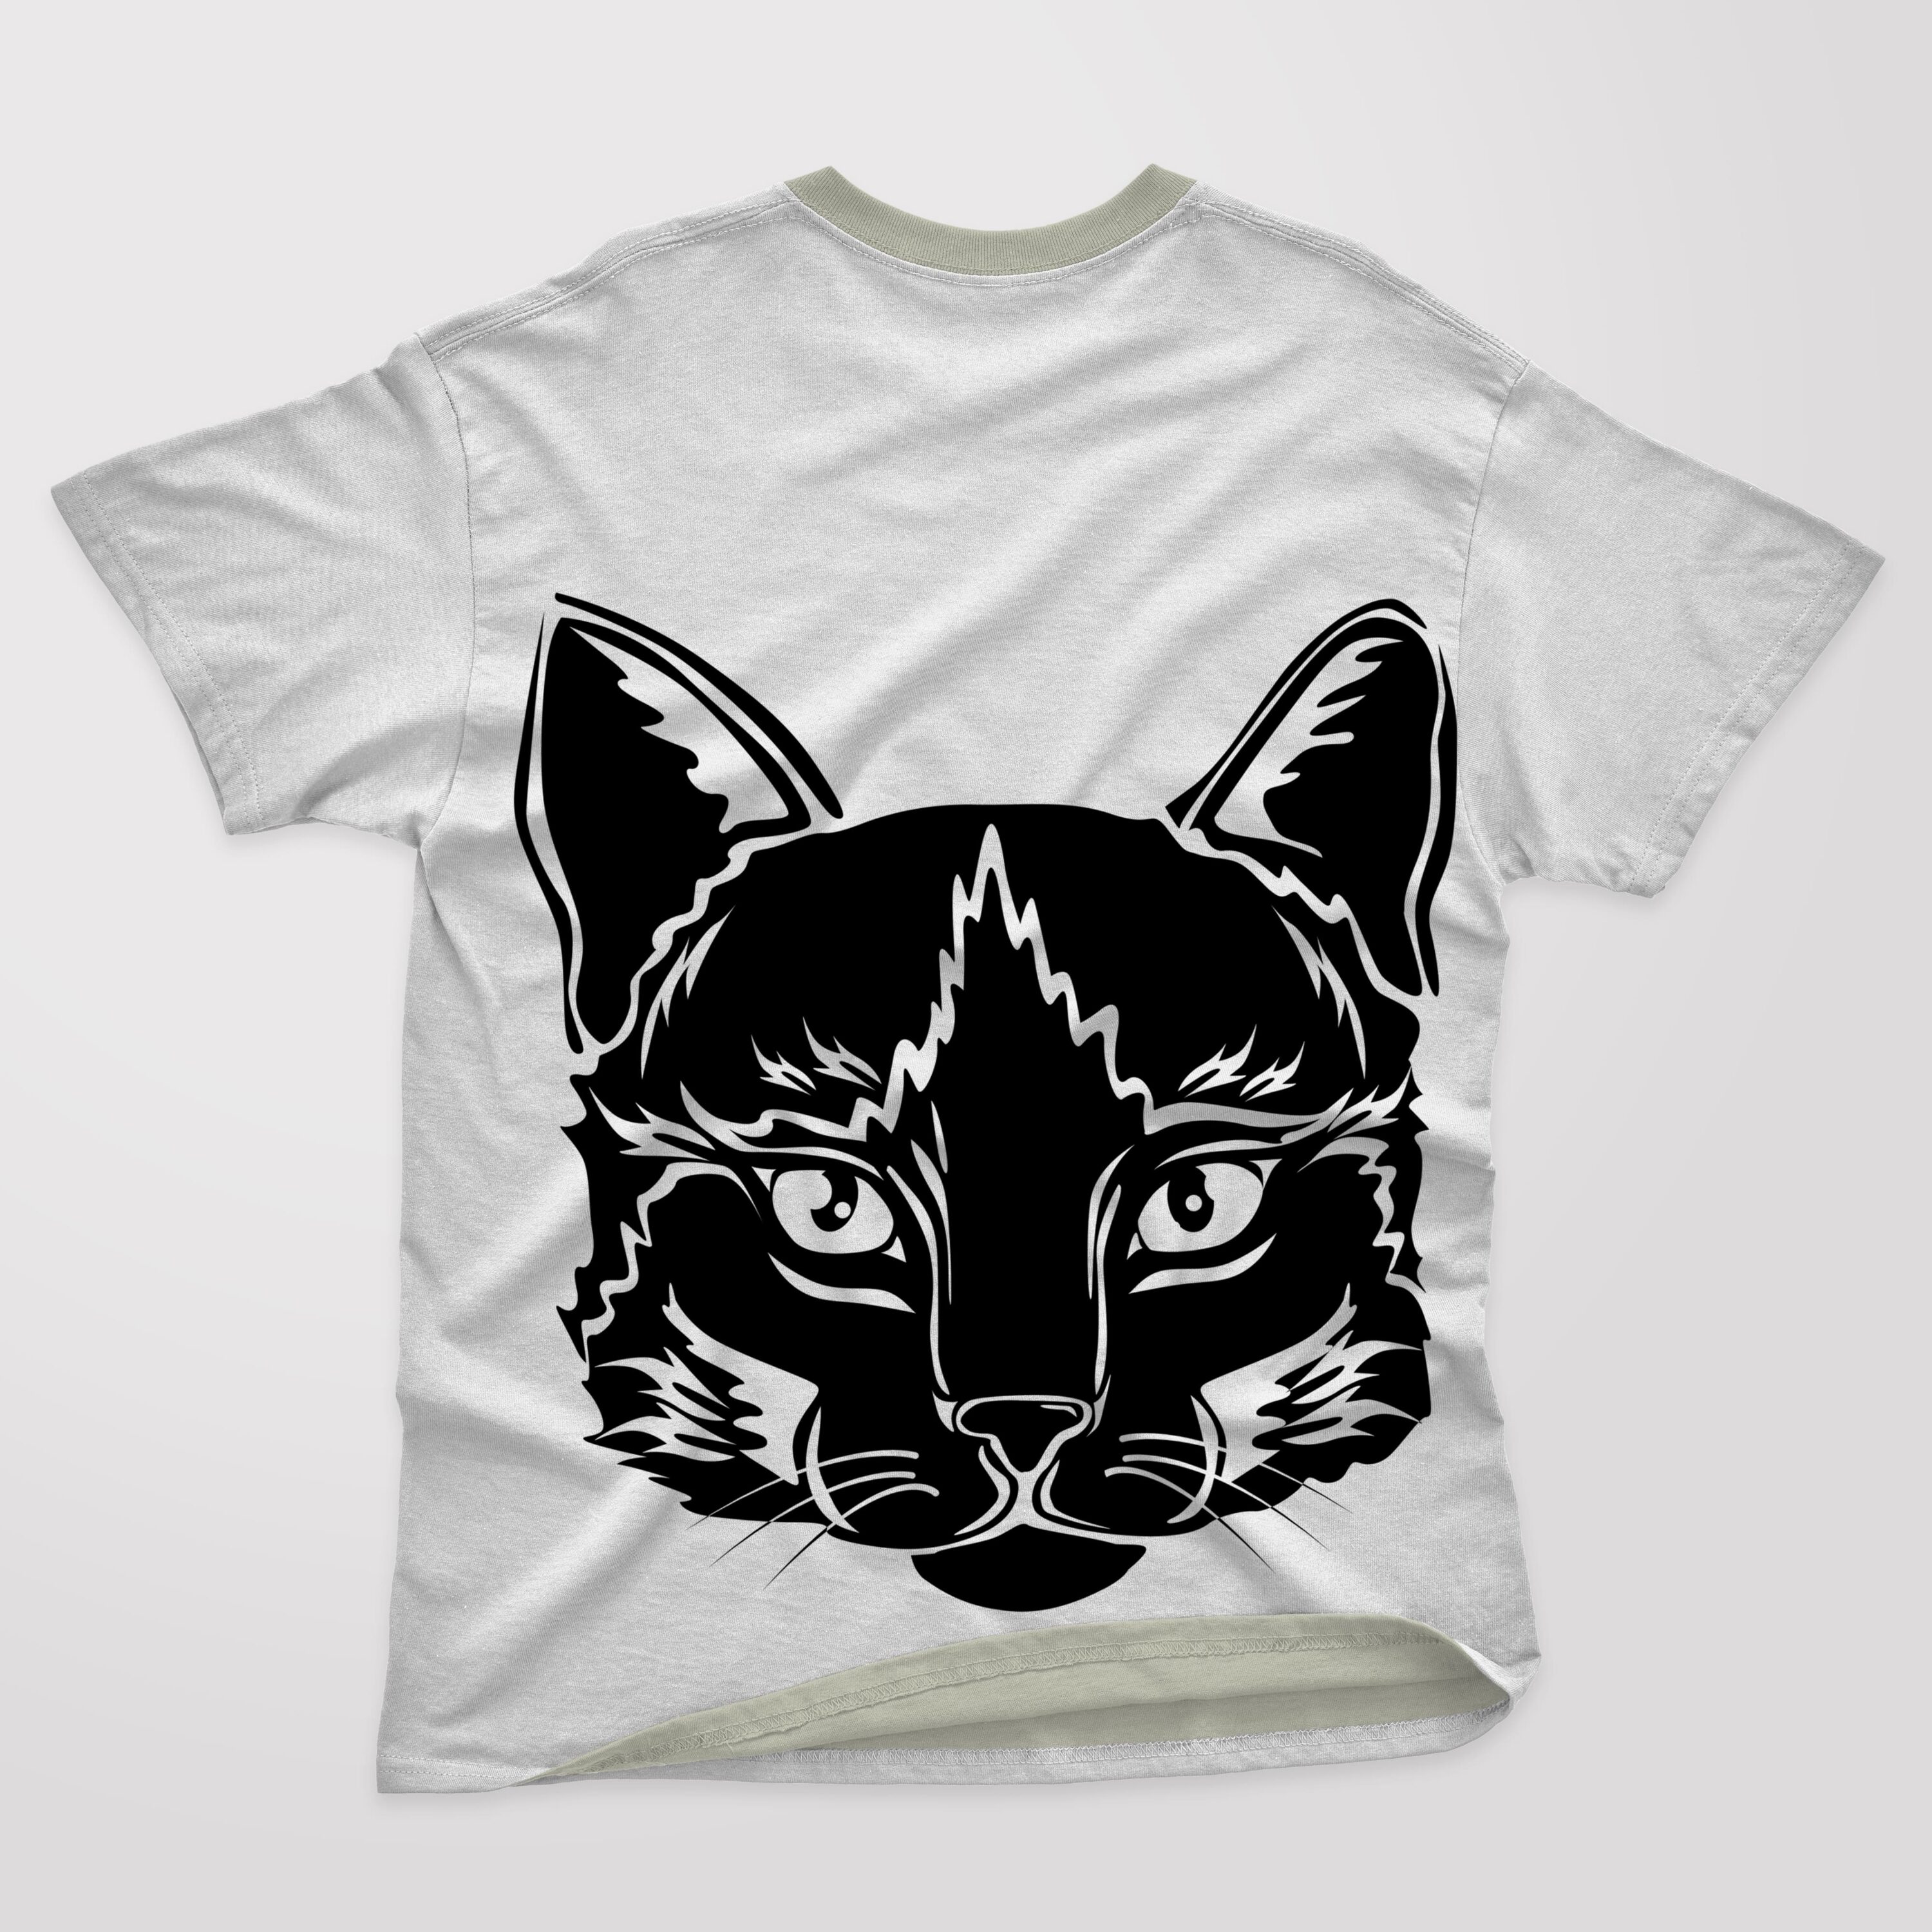 White T-shirt with a gray collar and a silhouette of a cat's face on the front.